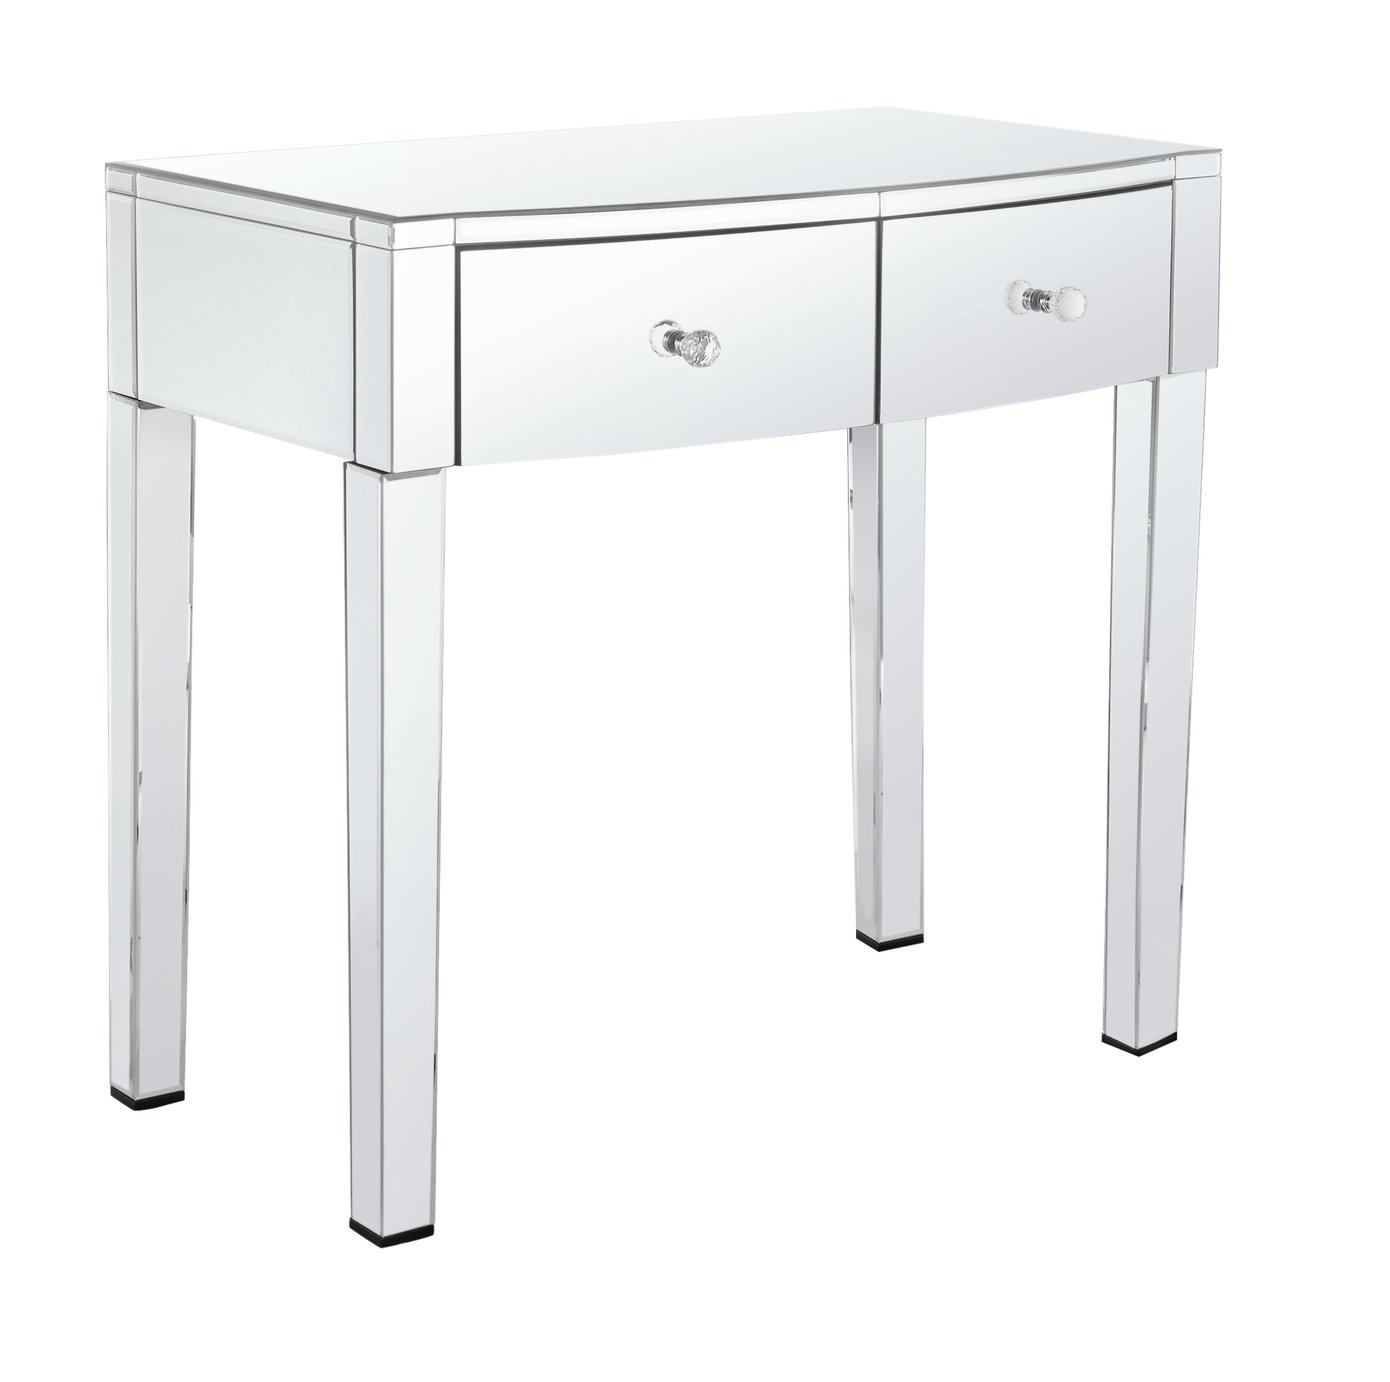 Argos Home Canzano 2 Drawer Dressing Table review